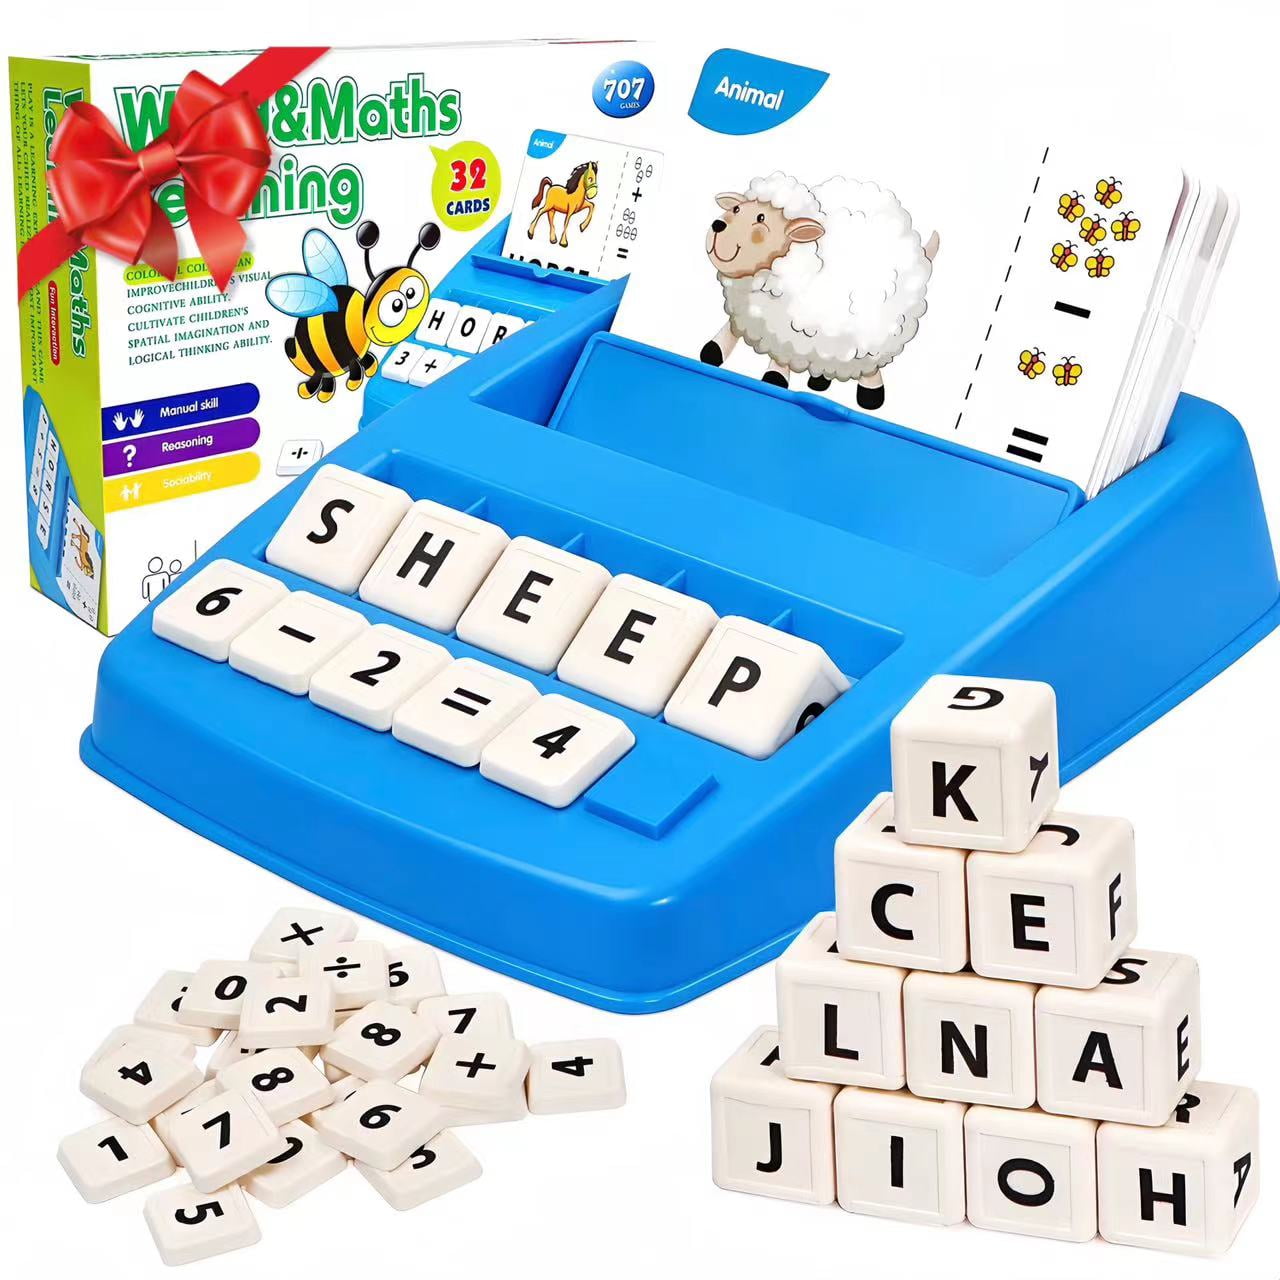 GXQSNOWEF Educational Learning Toys for 3 4 5 6 7 Year Old,Speech Therapy Autism Toys for Toddlers 3-4 Learning Materials Sensory Toys,224 Sight Words